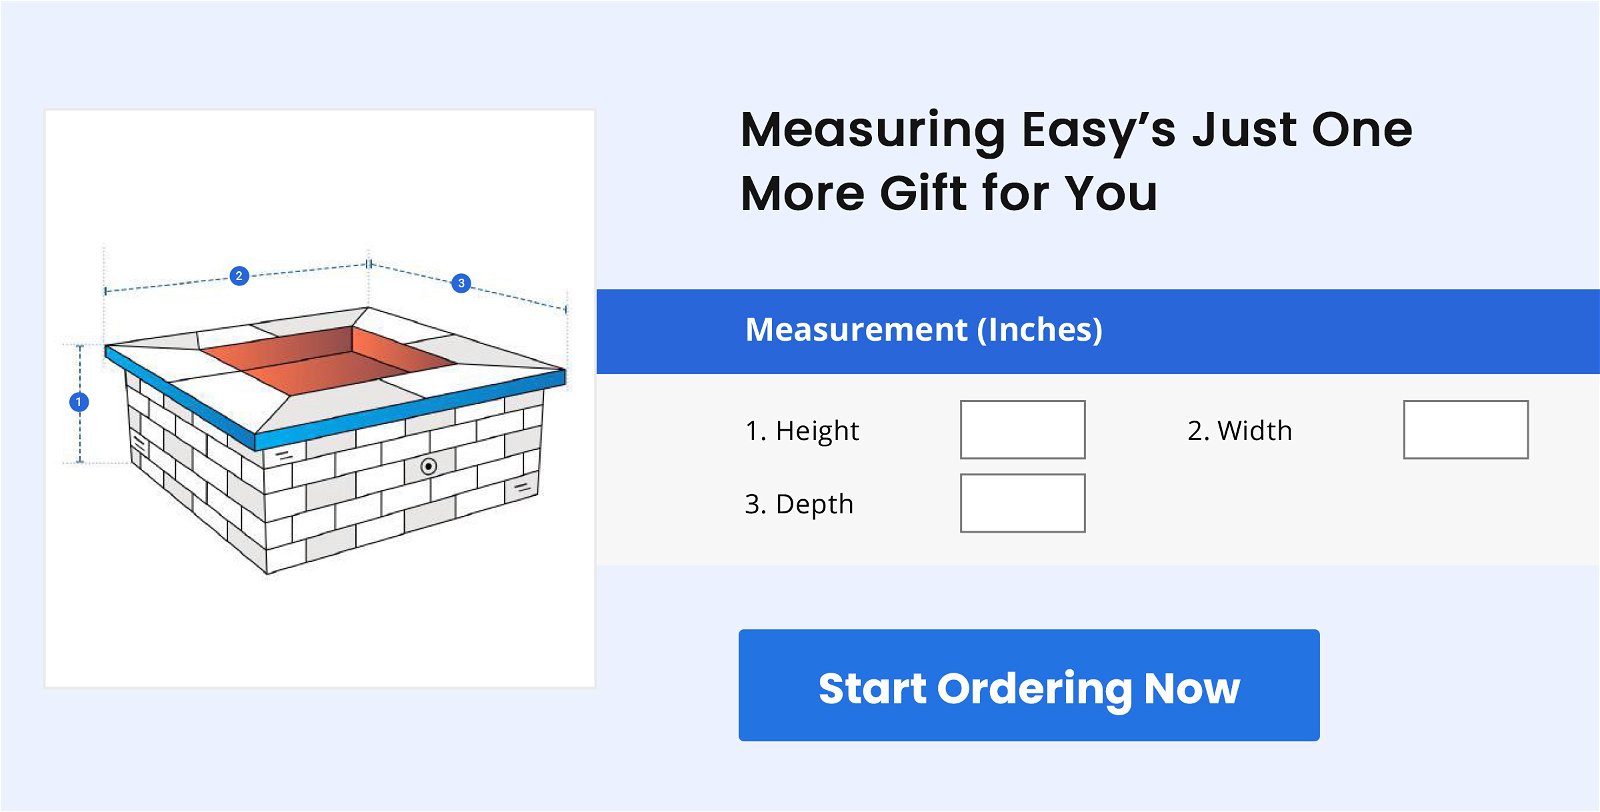 Measuring Easy's Just One More Gift for You